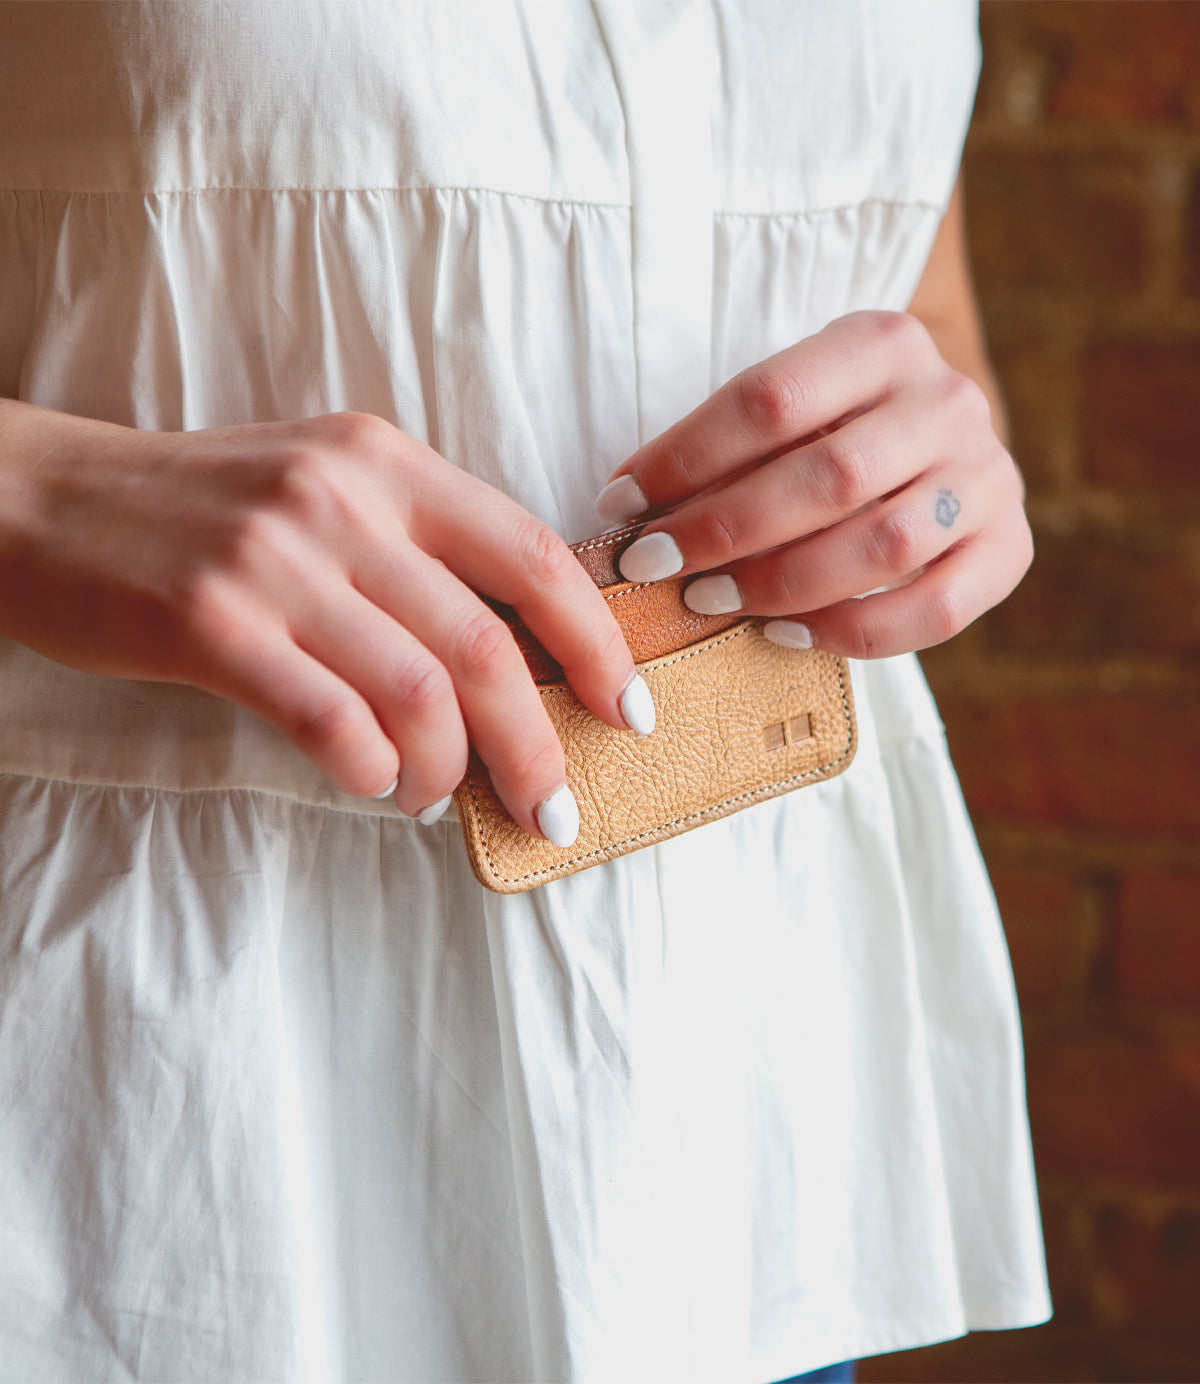 A woman in a white dress holding a Chuck by Bed Stu, a convenient small leather wallet.